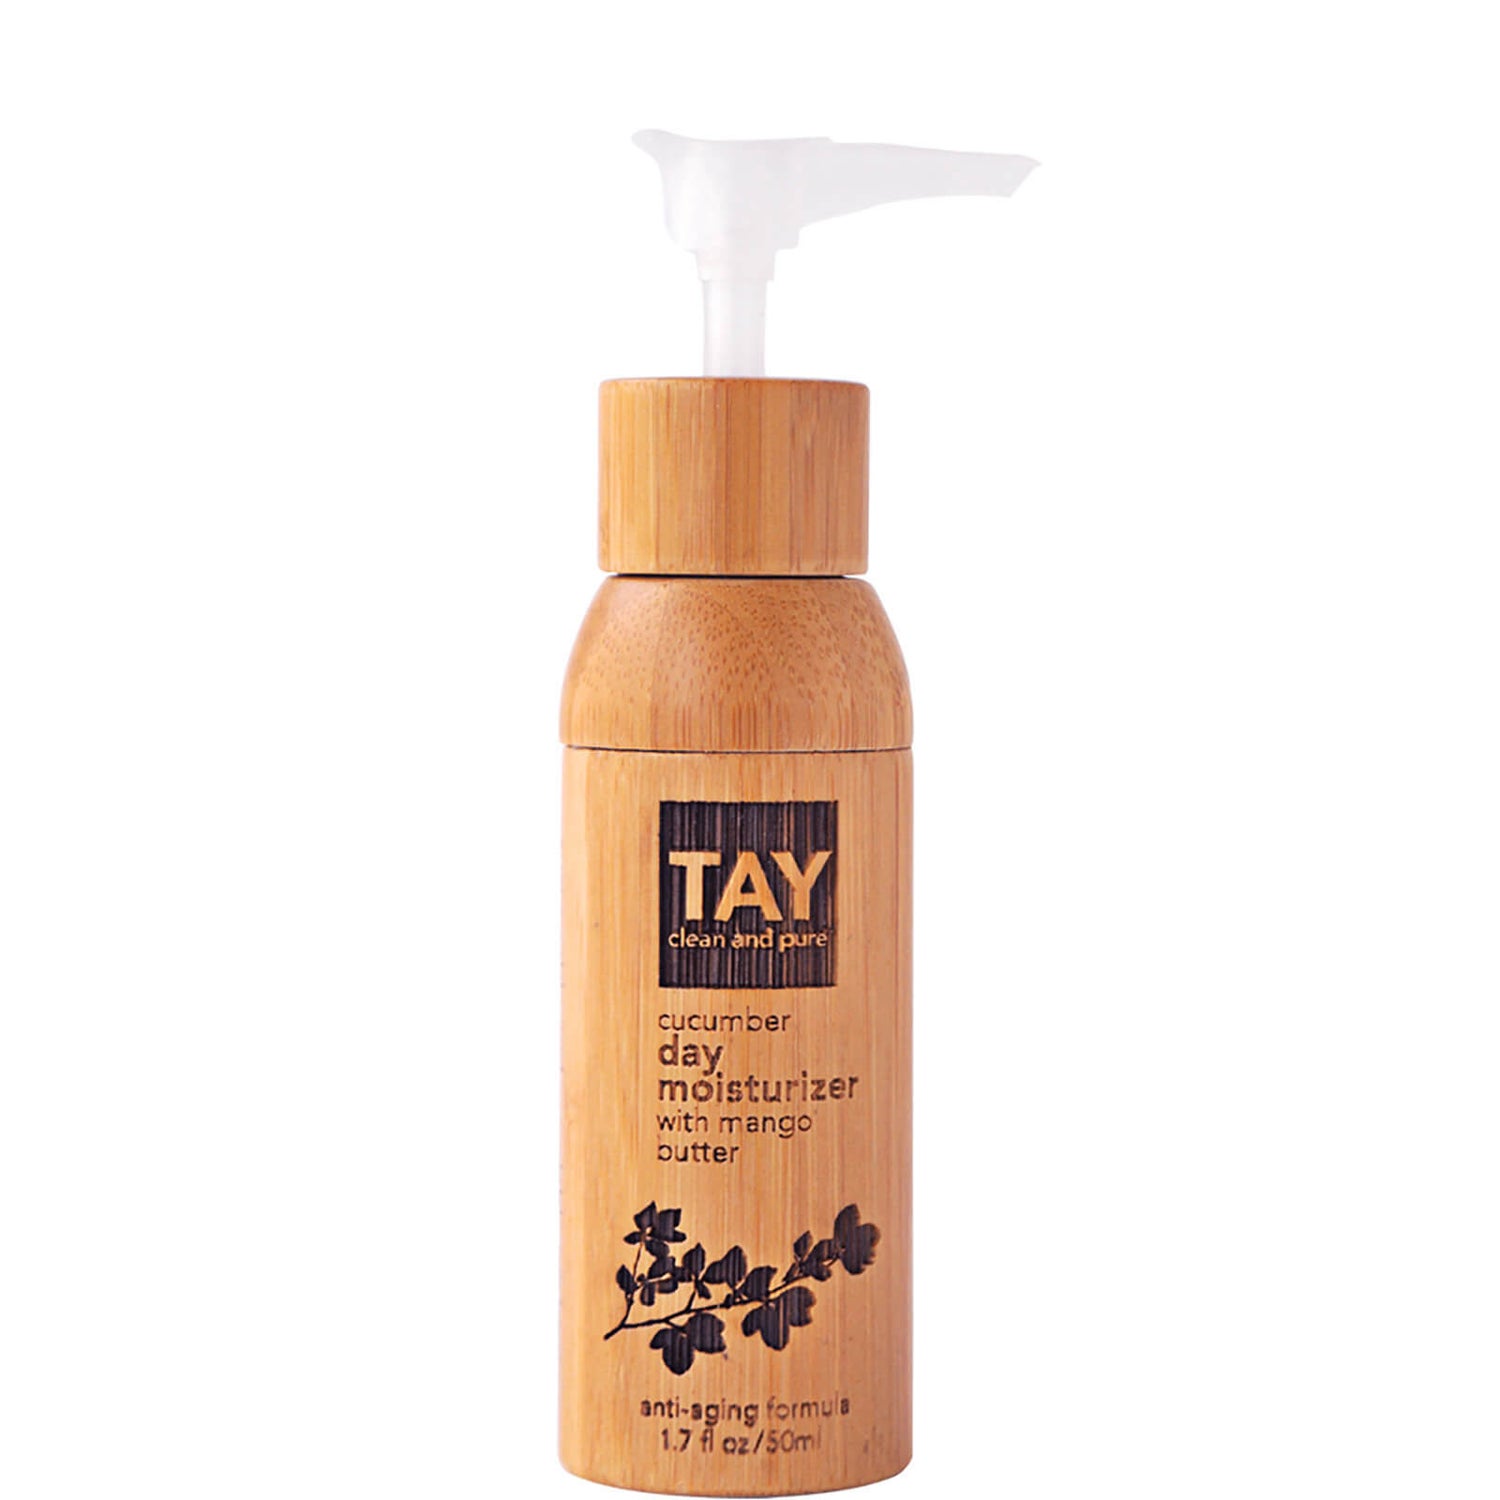 Tay Skincare Cucumber Day Moisturizer with Mango Butter